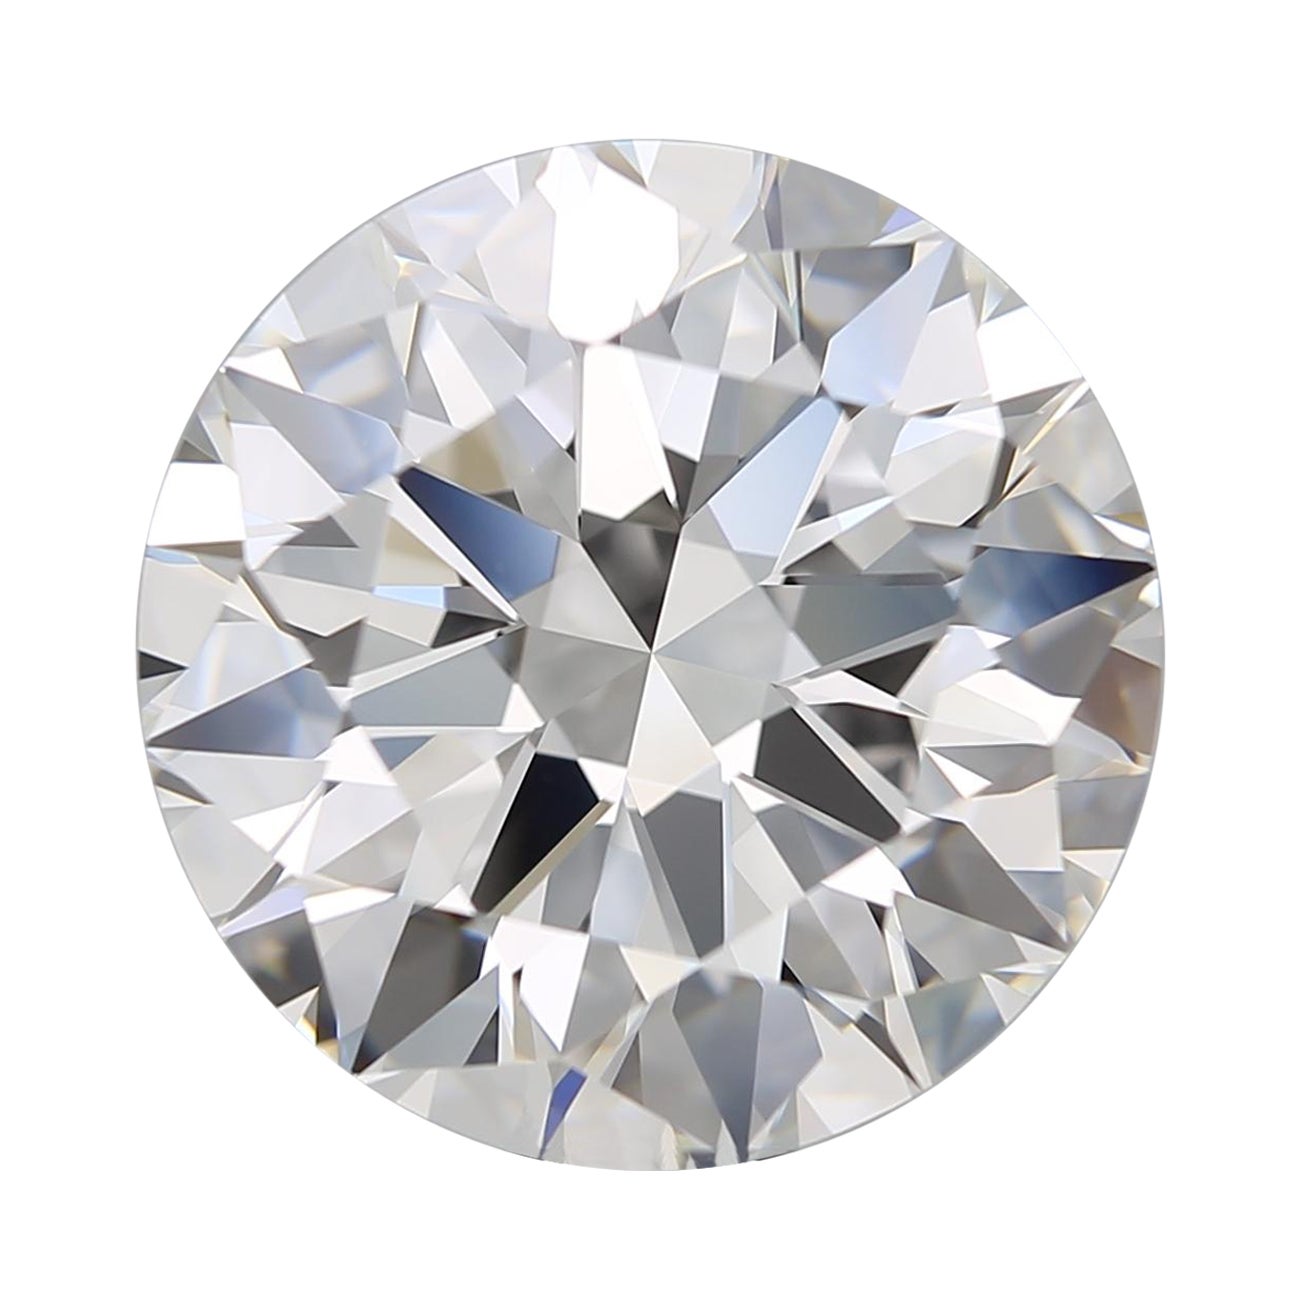  GIA Certified IF Clarity 7.59 Carat Round Brilliant Cut Diamond For Sale